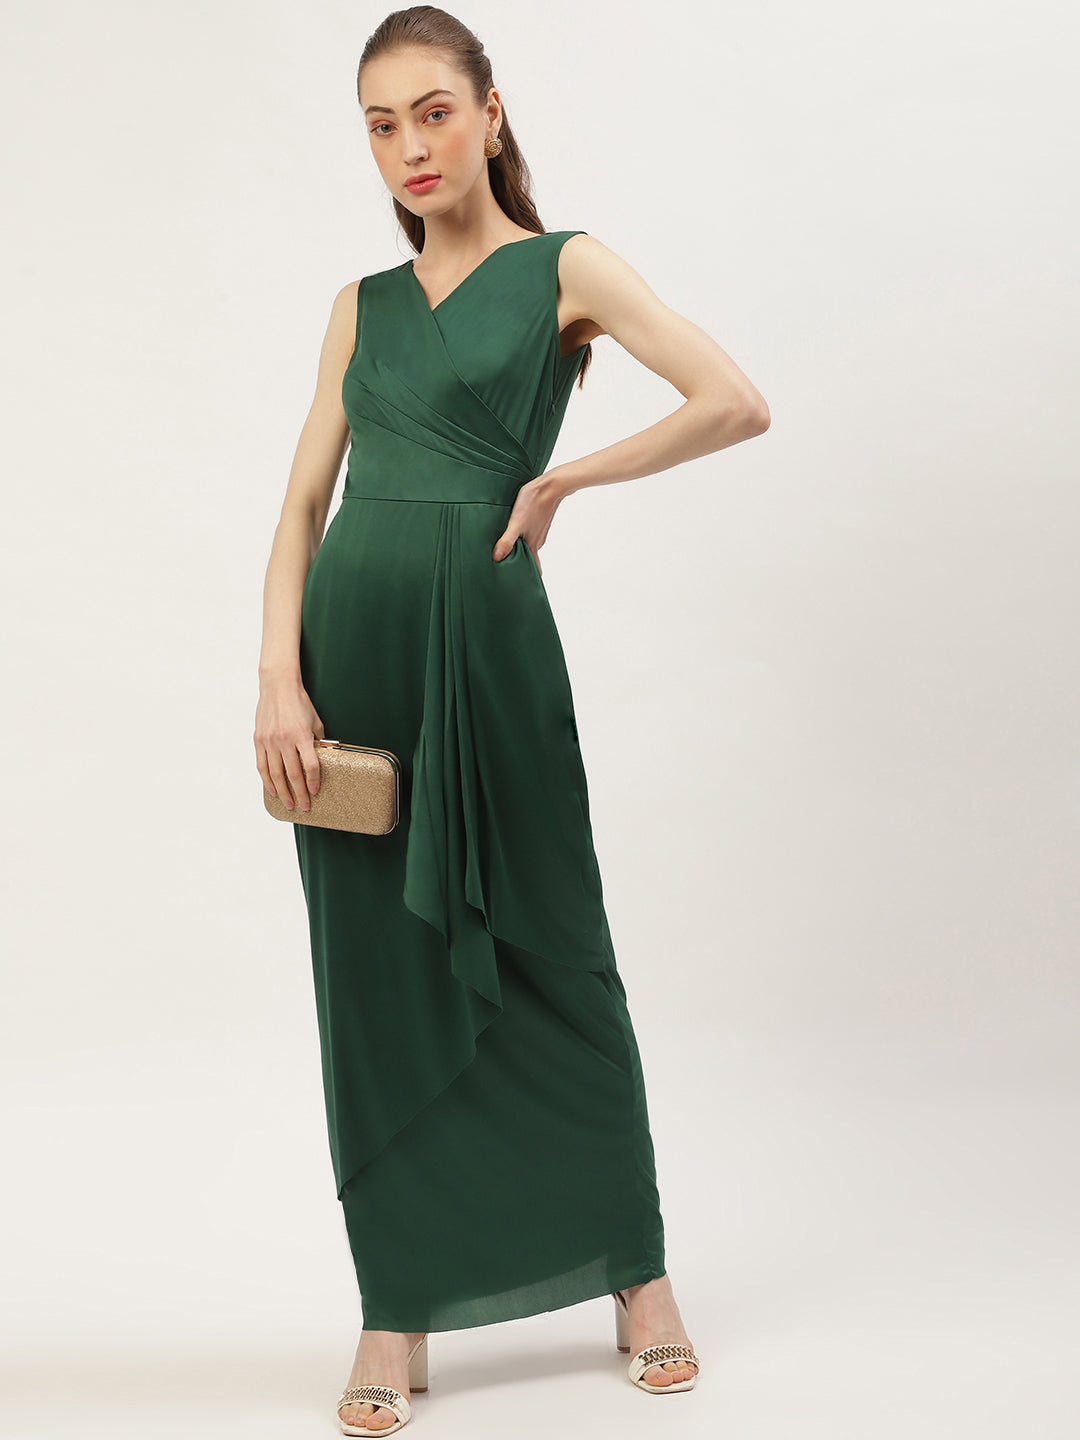 Shop Olive Green Maxi Dress for womens in the USA - Easy Returns -Fledgling  Wings | Maxi dress green, A line dress, Maxi dress